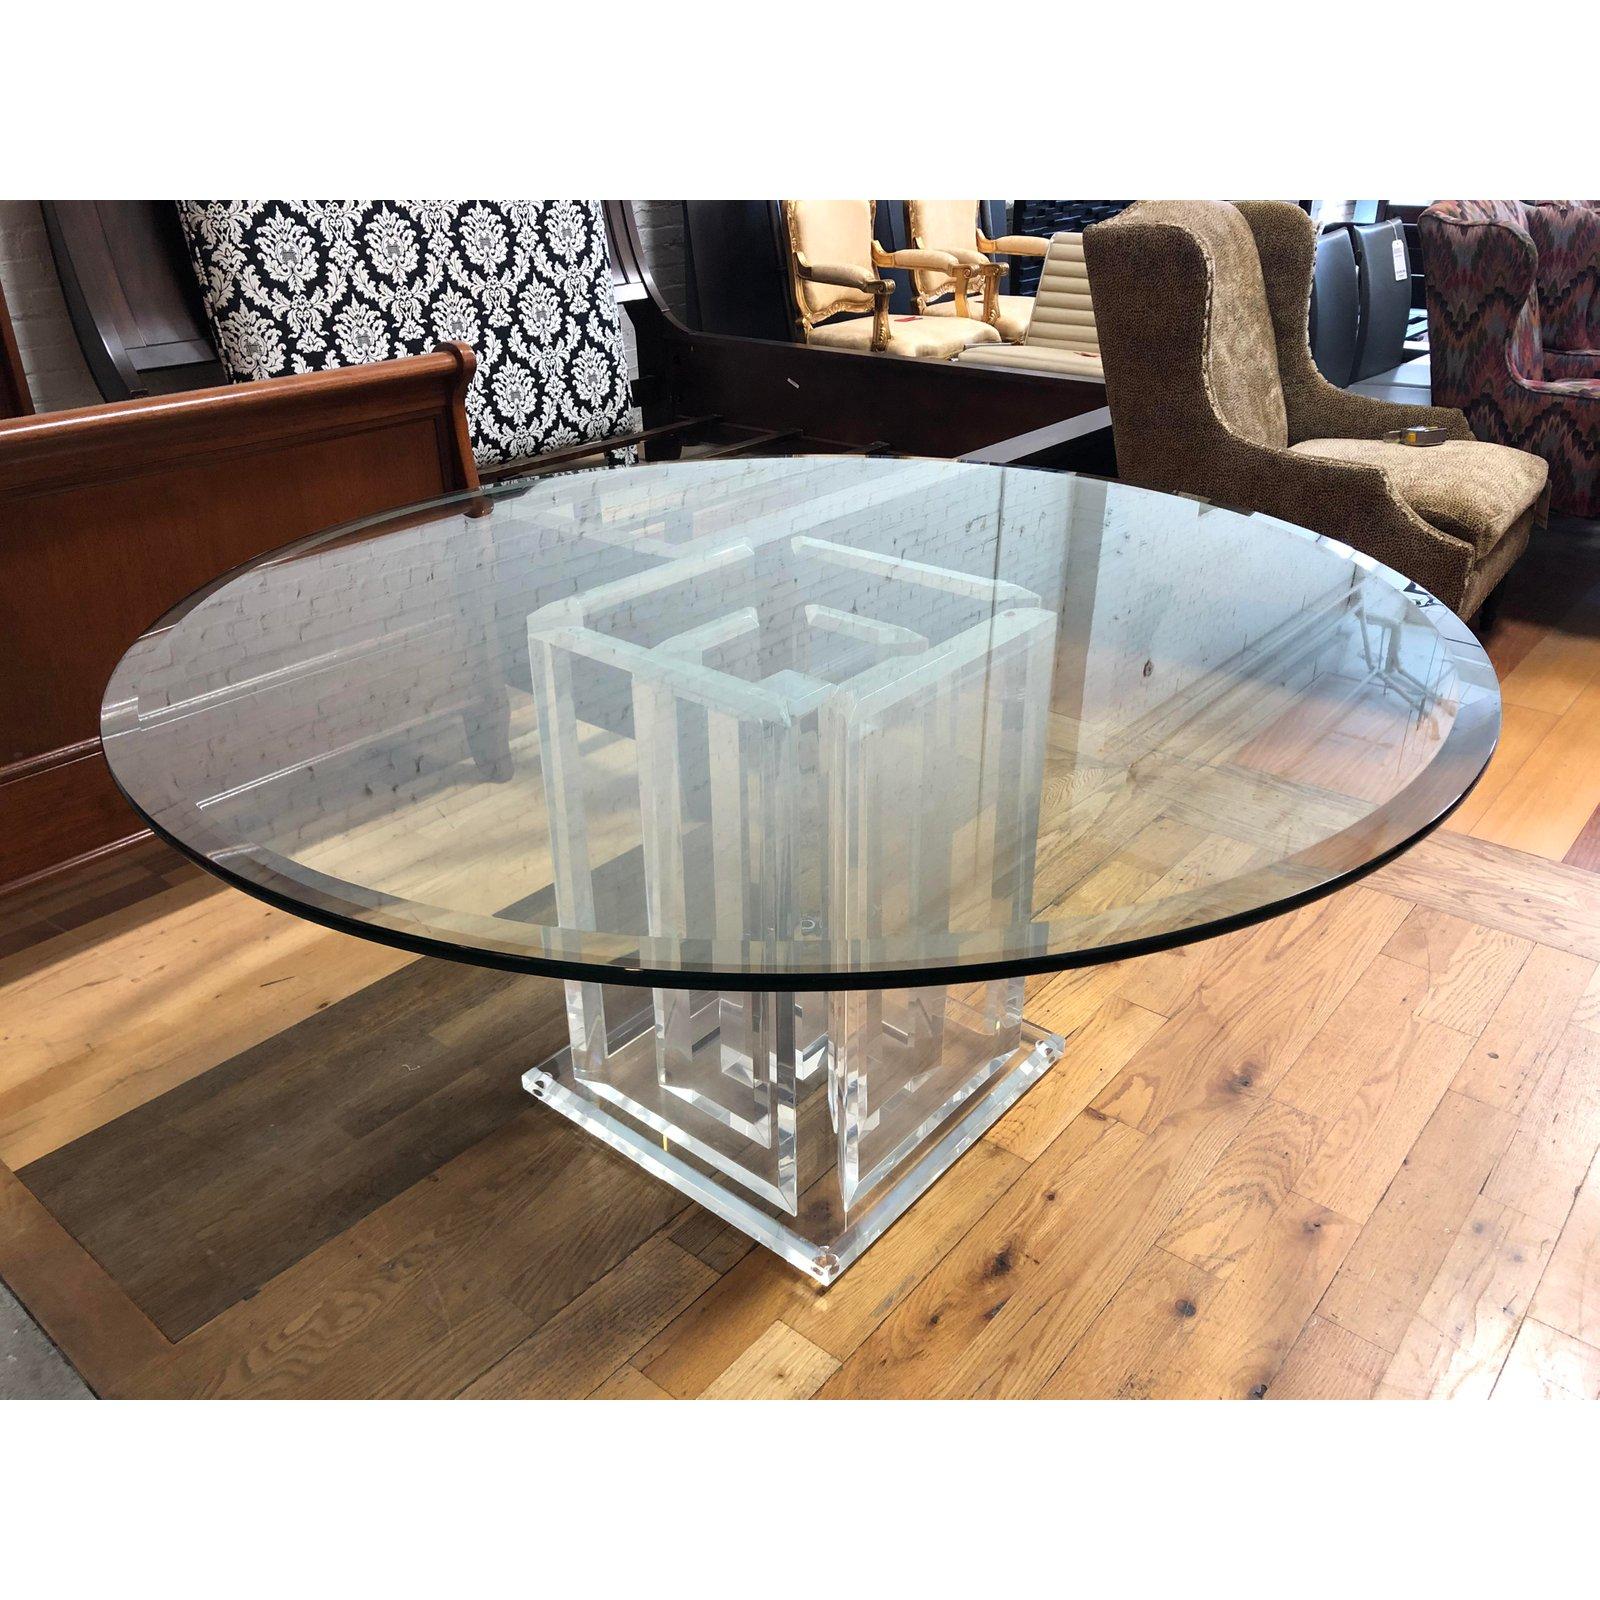 It presents a custom acrylic base round table. Originally purchased from the San Francisco Design Center. The base is a nine pillar acrylic base. A custom round beveled edge top. Great addition for the dining room, breakfast room off